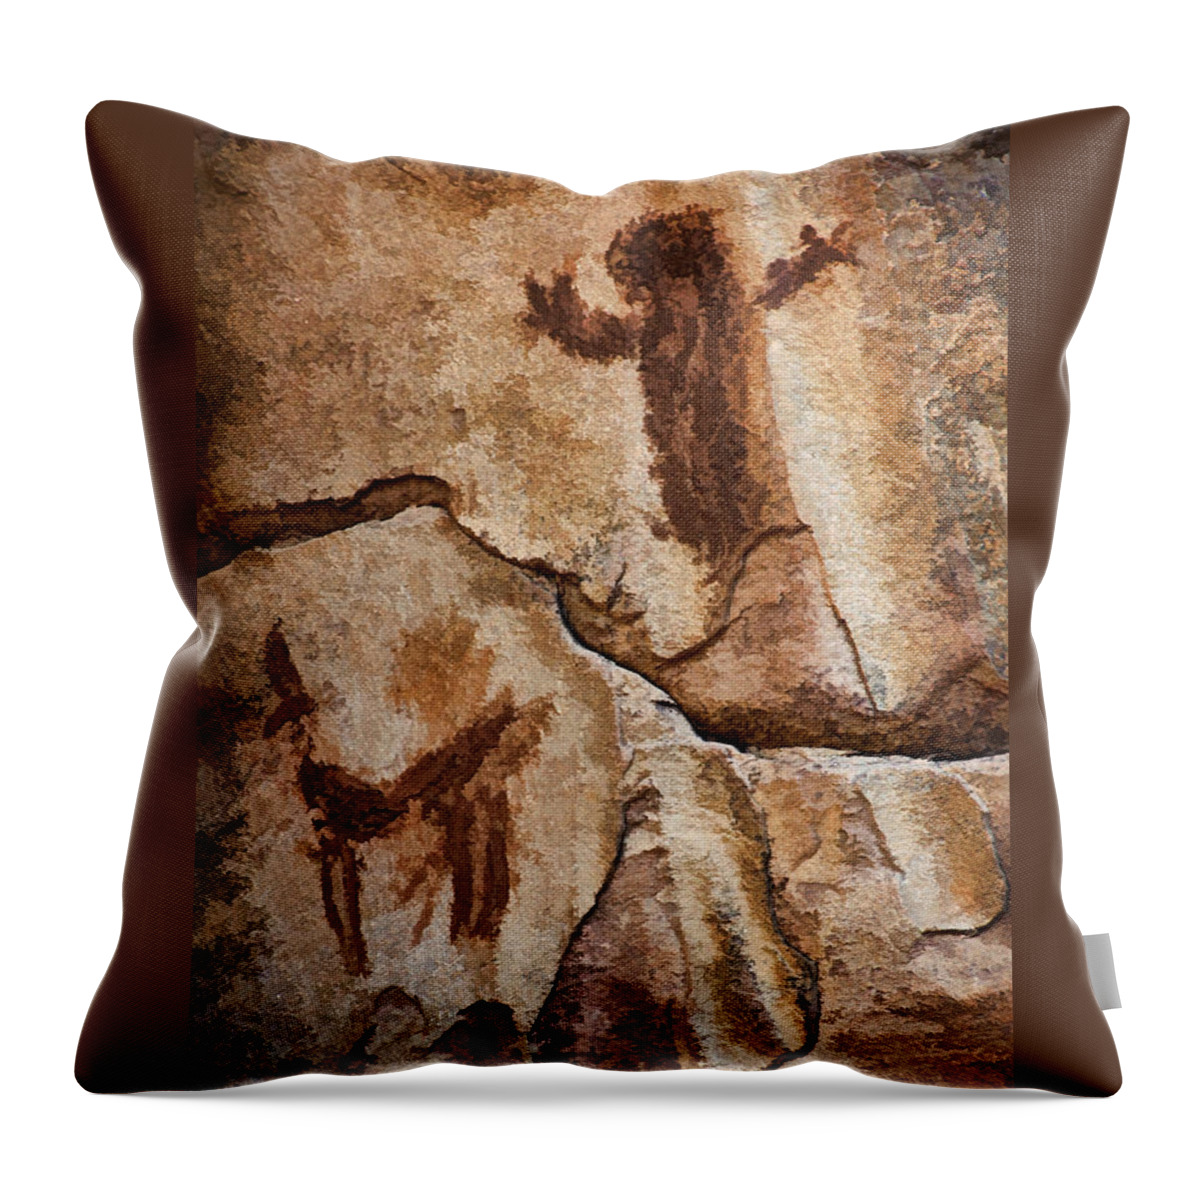 Honanki Throw Pillow featuring the photograph Honanki Pictograph1 Pnt by Theo O'Connor